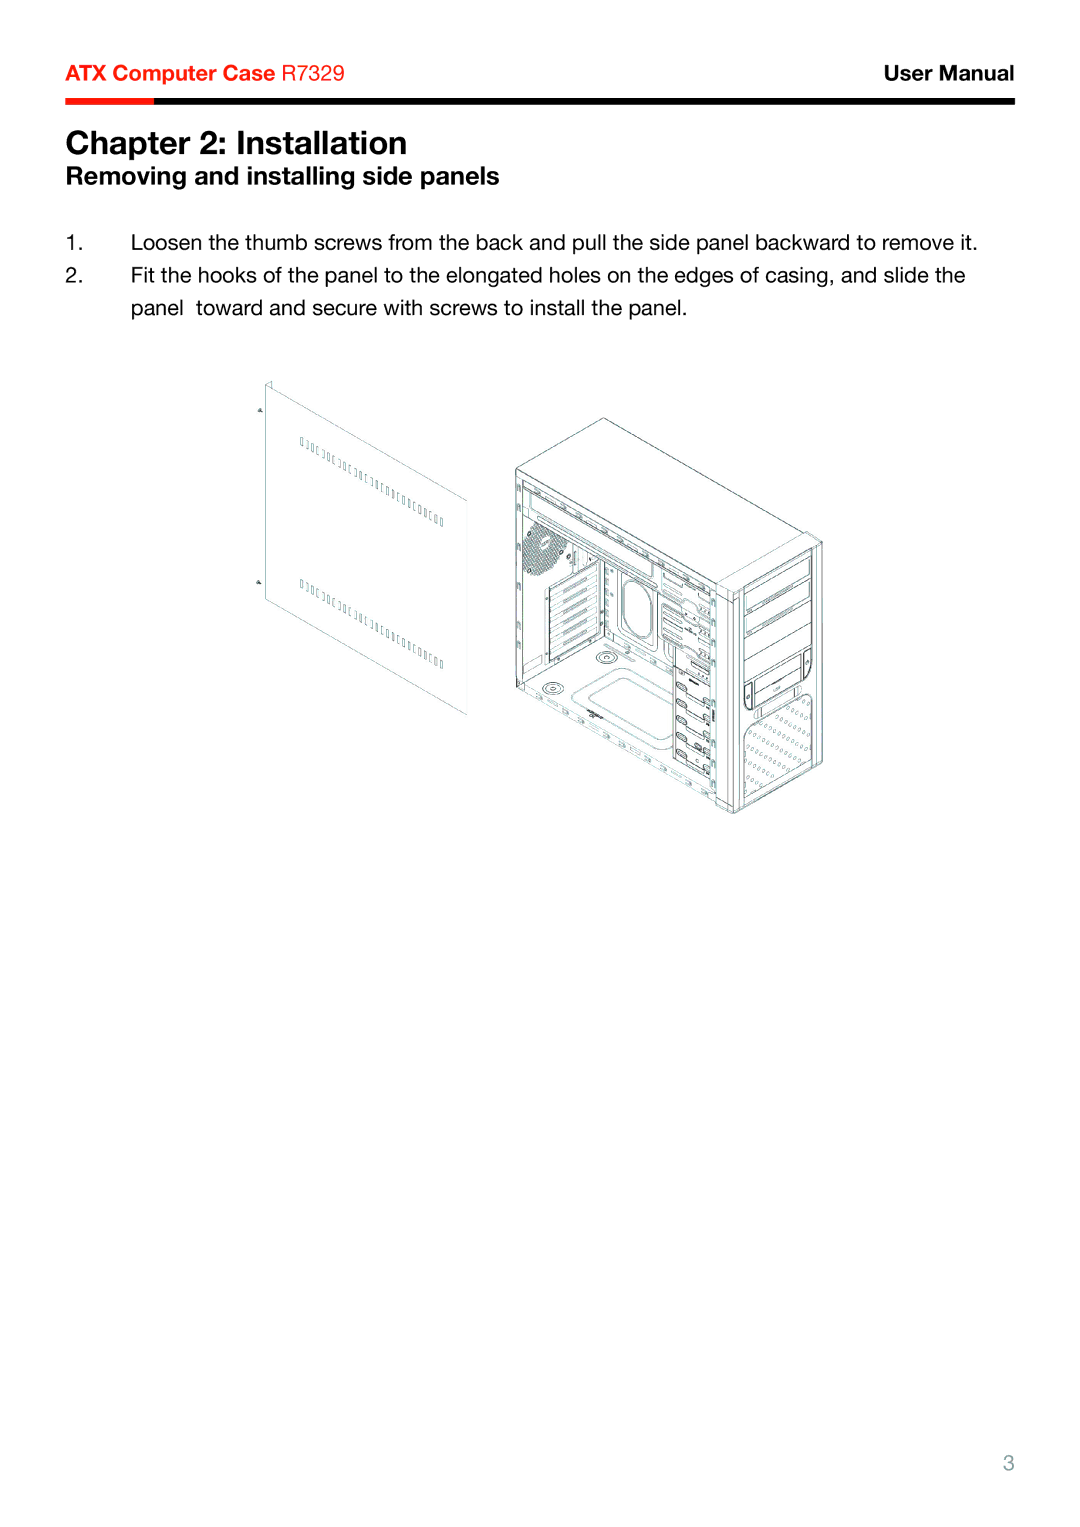 Rosewill R7329 user manual Installation, Removing and installing side panels 